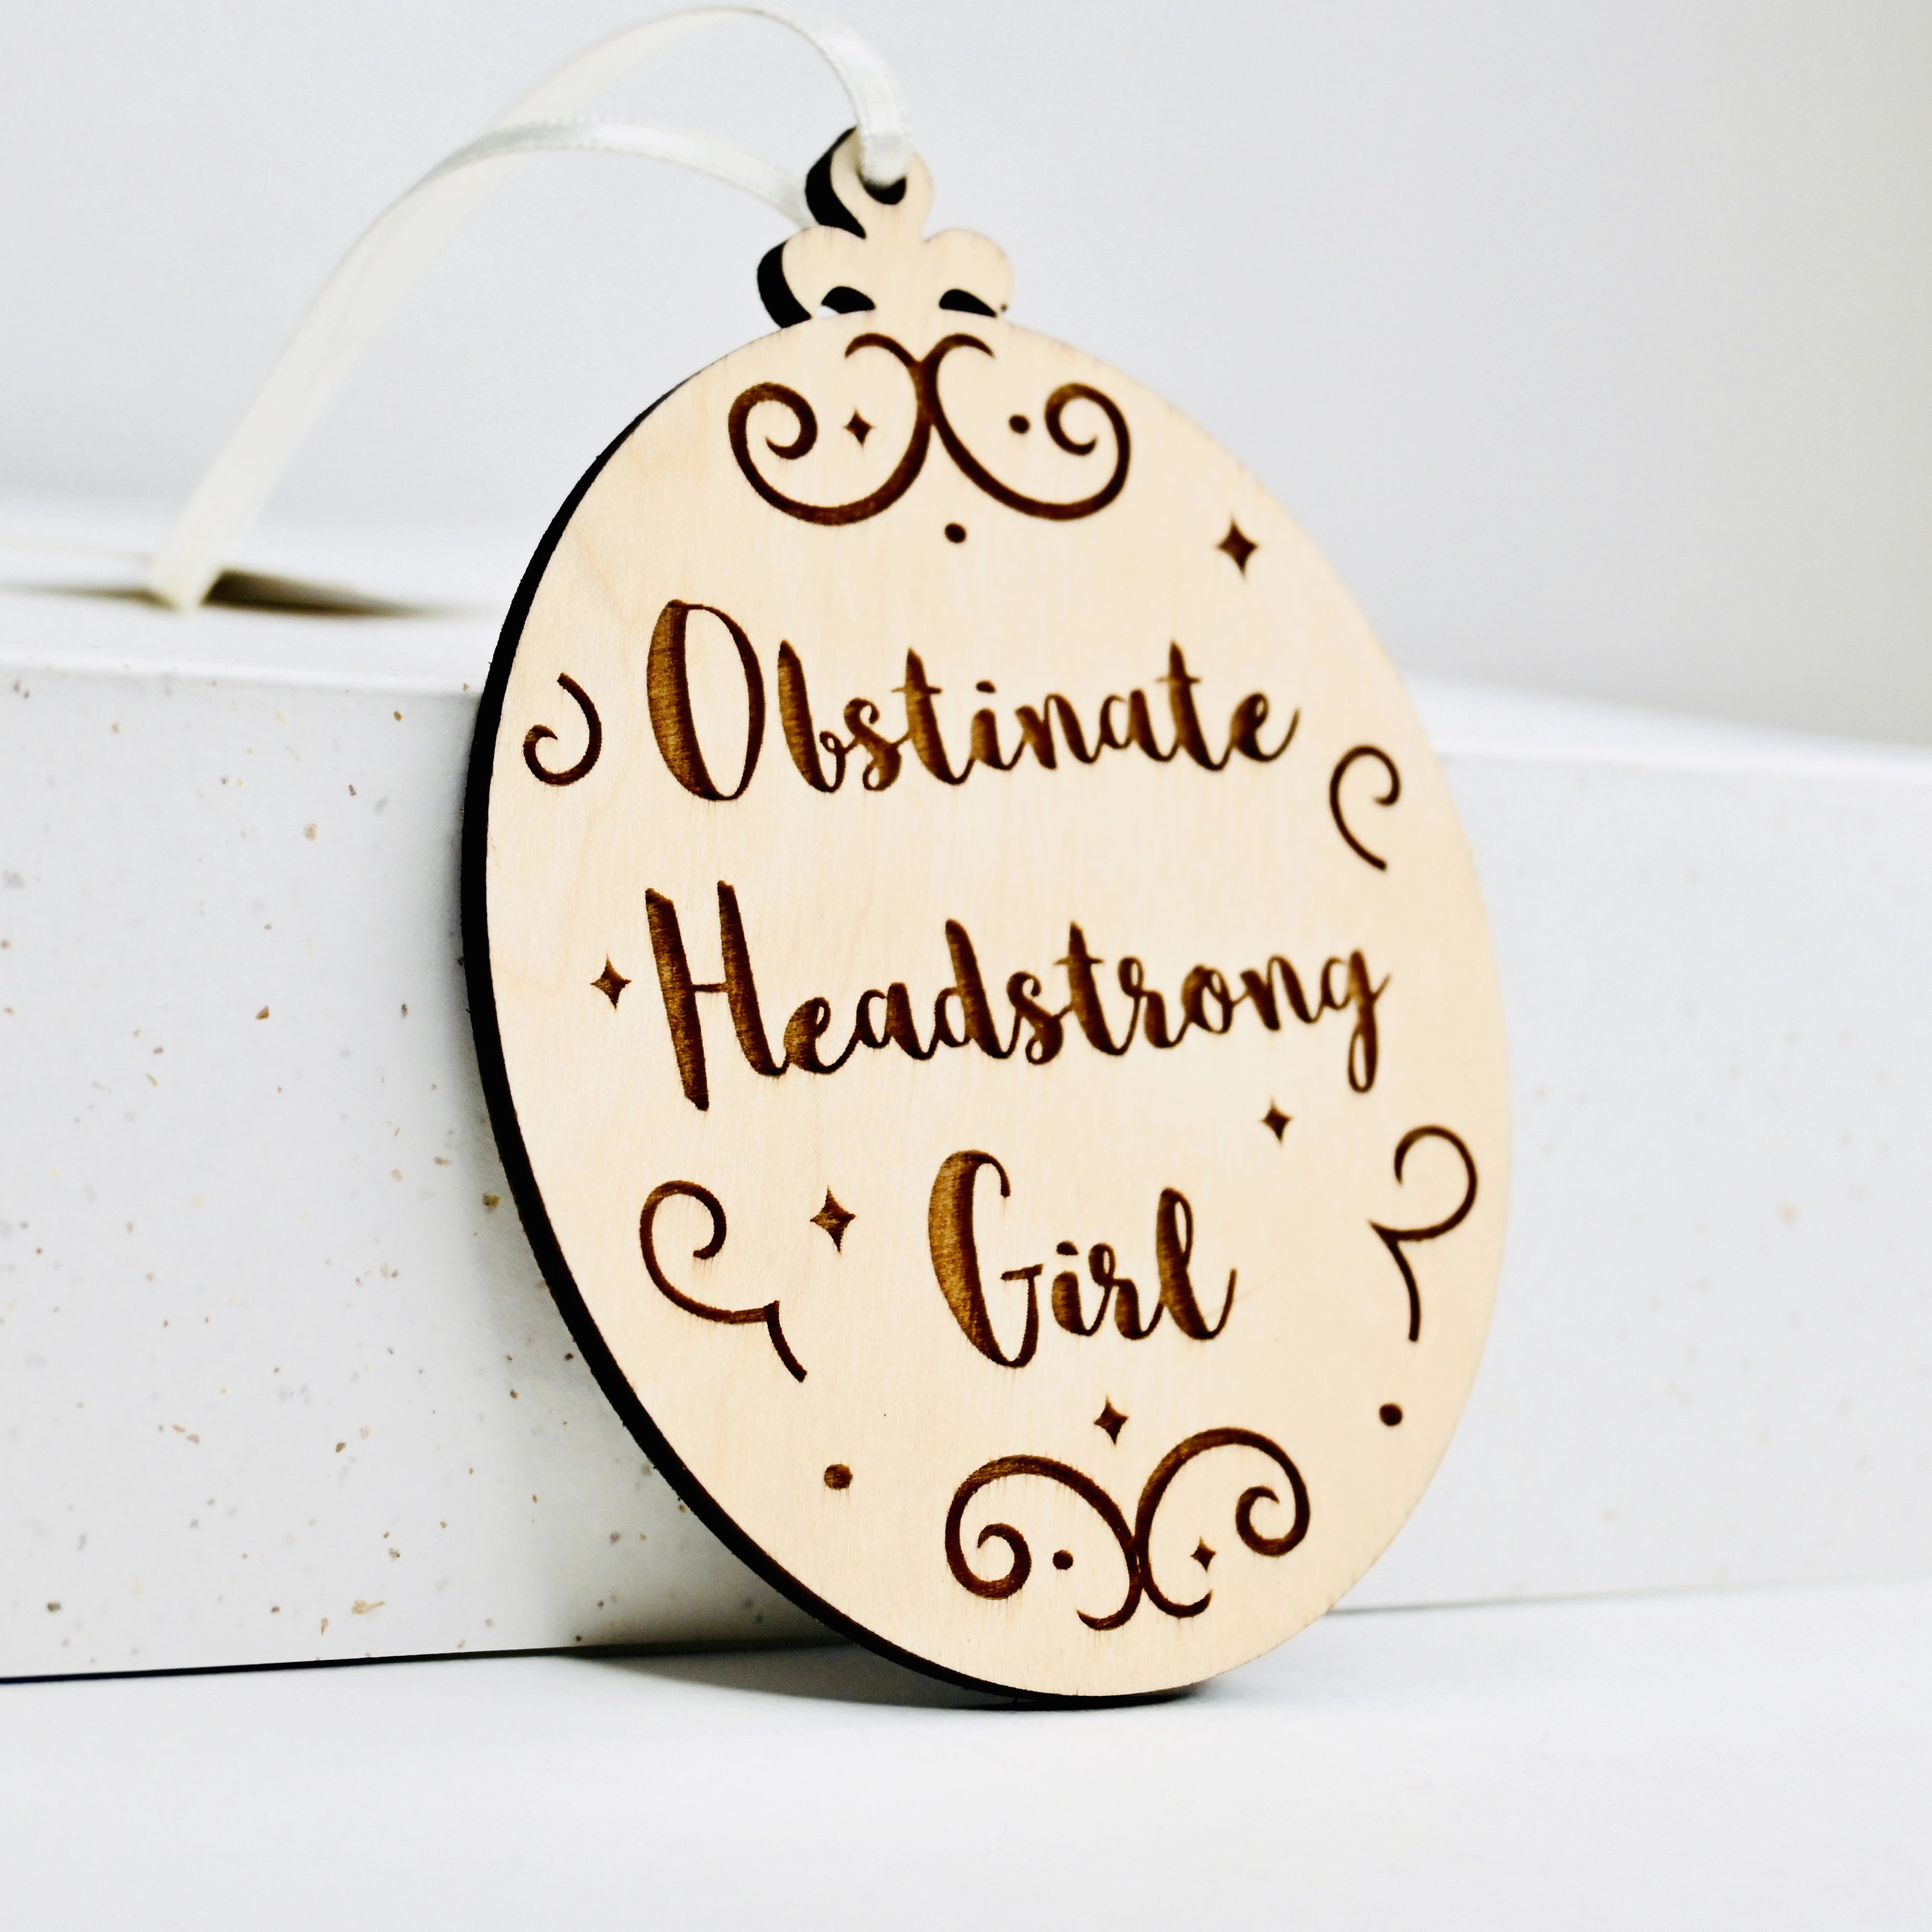 Pride and Prejudice 'Obstinate Headstrong Girl' Quote Decoration